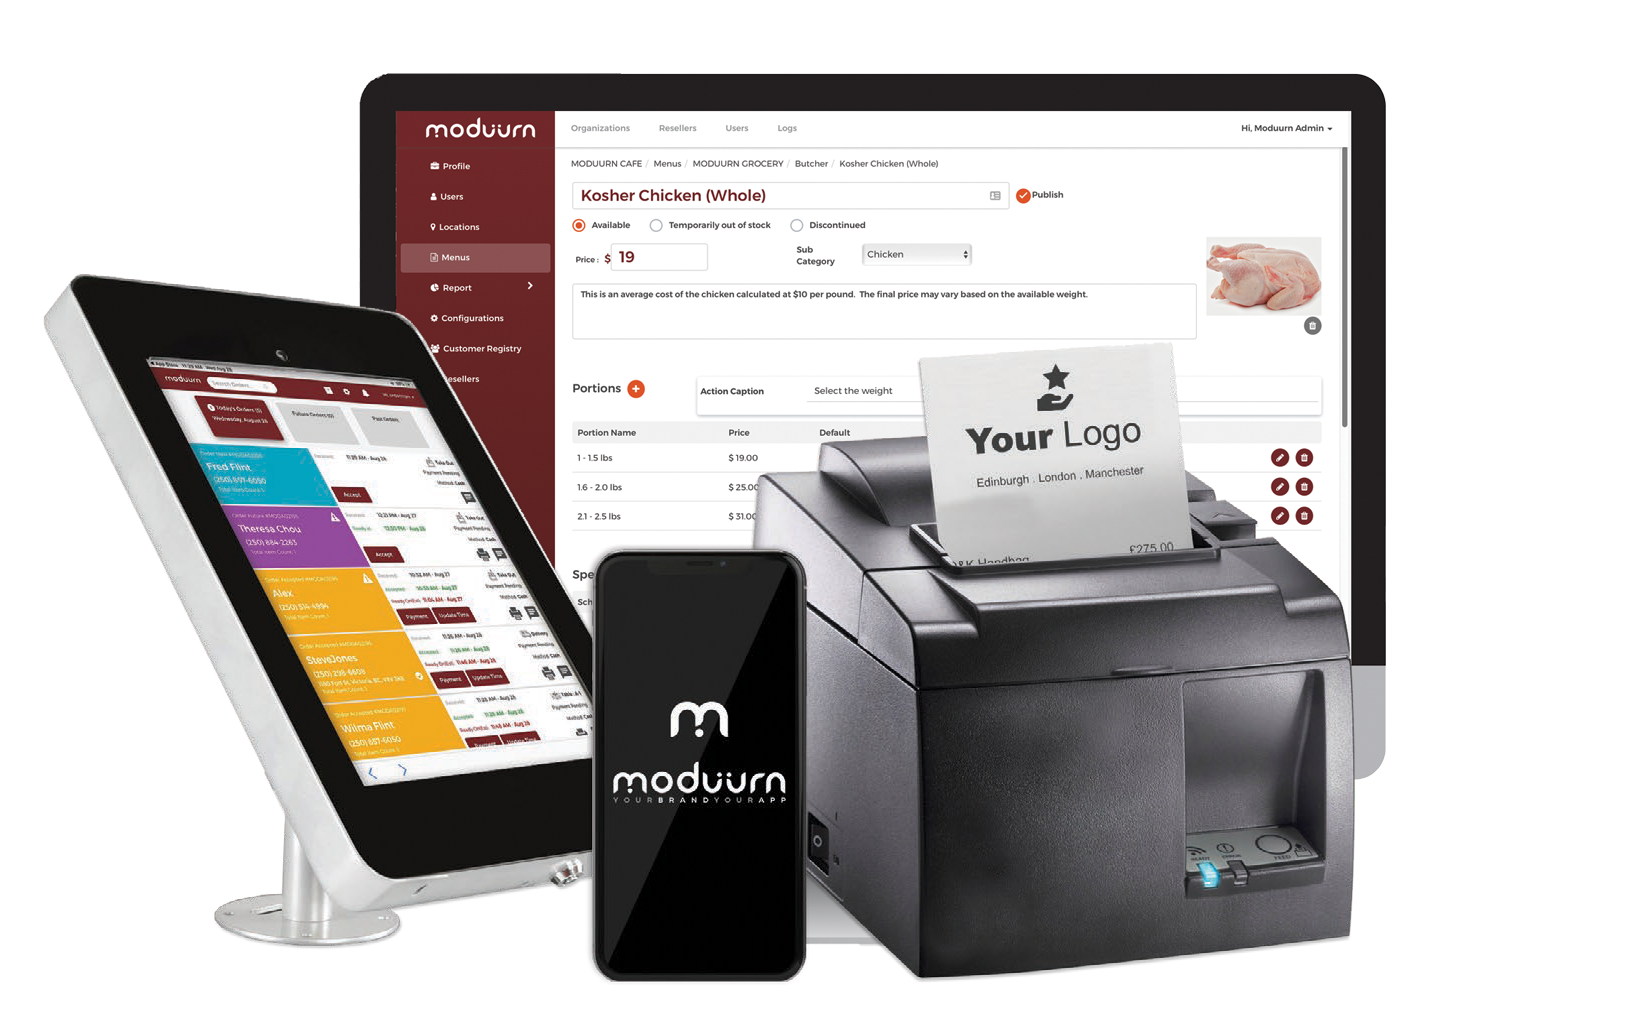 Moduurn mobile ordering system